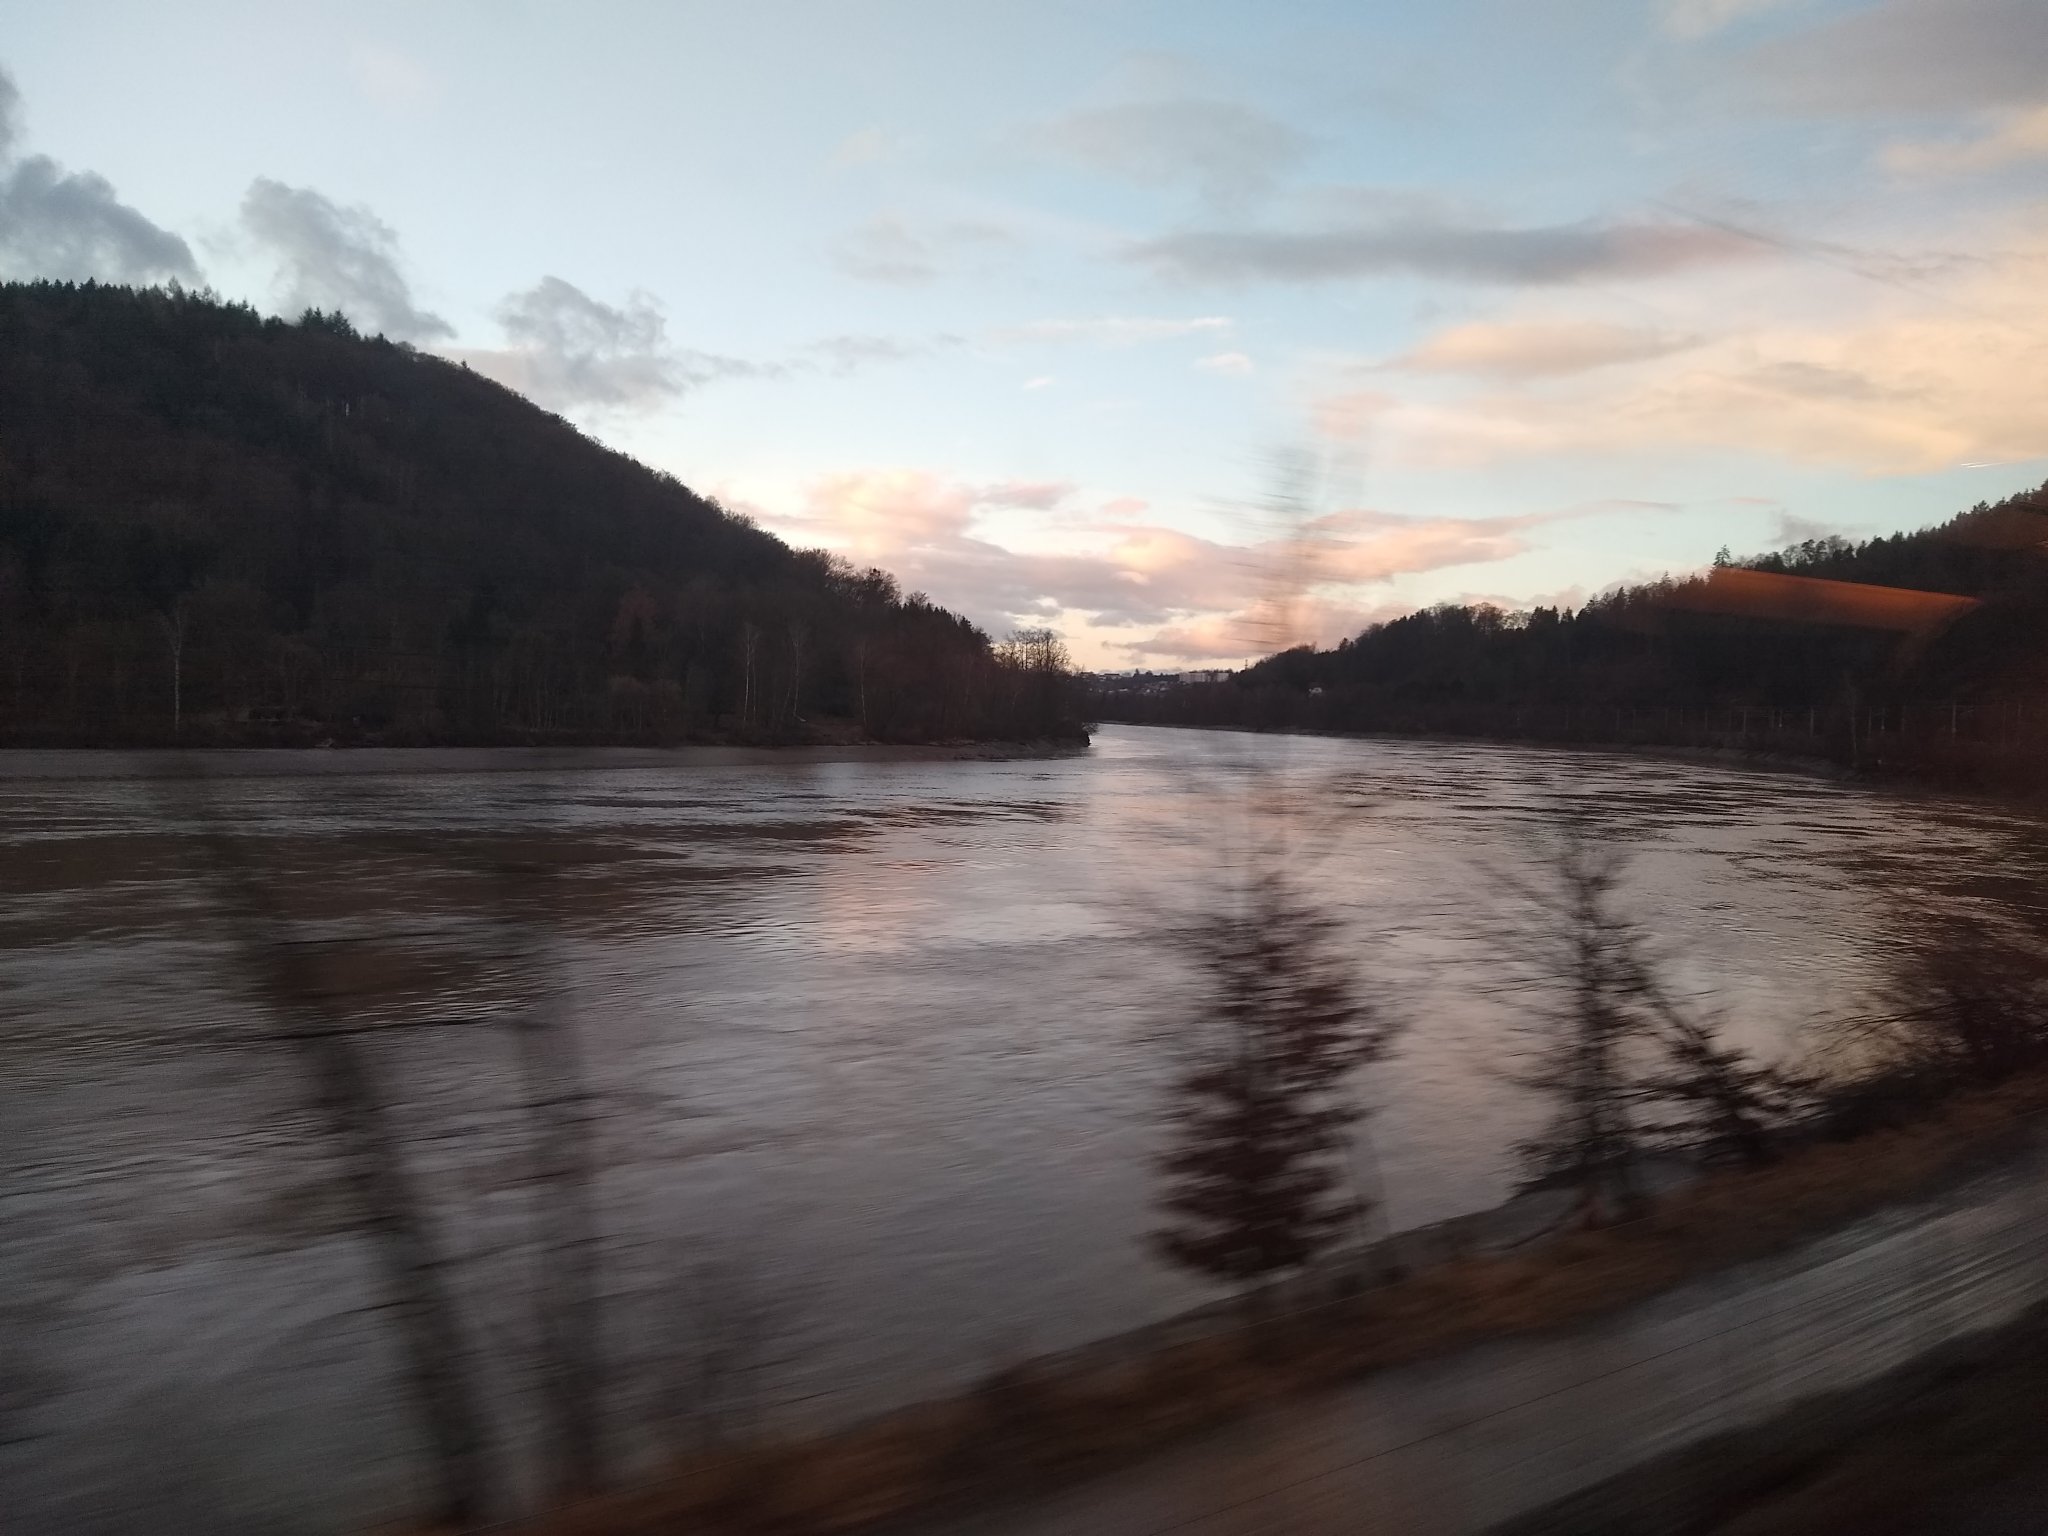 The view out of the window: going along the river from Passau to Linz